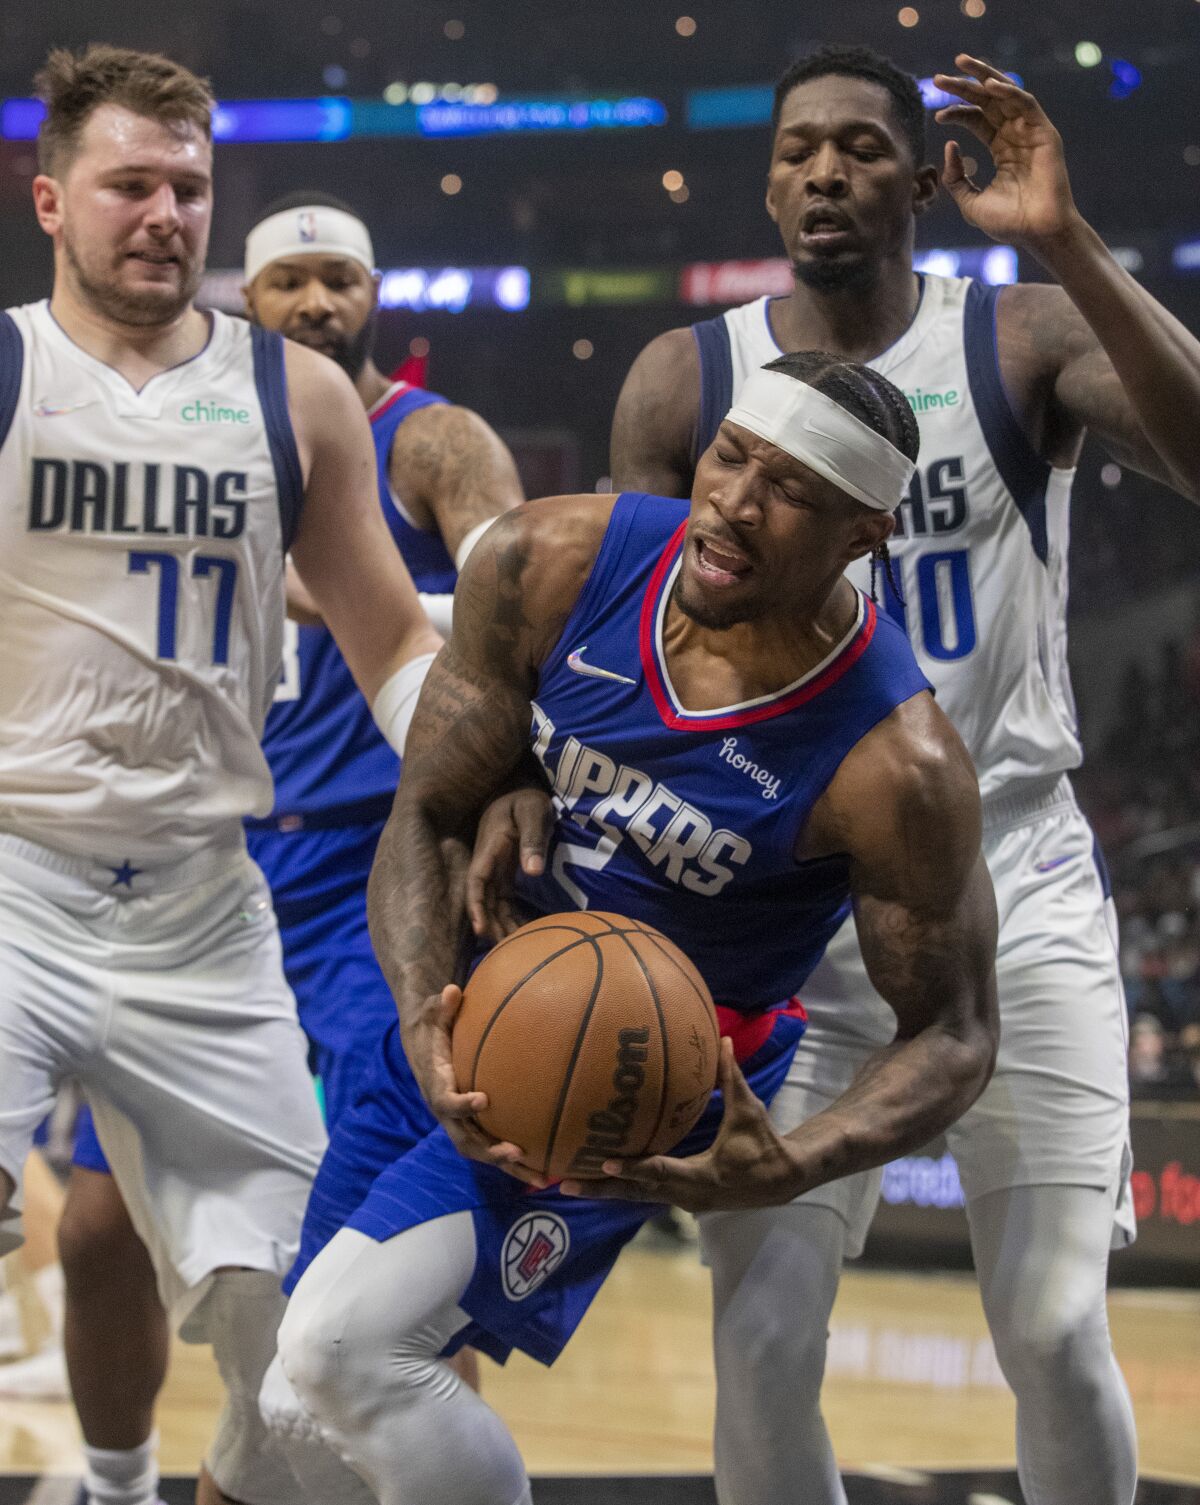 Clippers guard Eric Bledsoe grabs a rebound between Dallas Mavericks' Luka Doncic (77) and Dorian Finney-Smith.